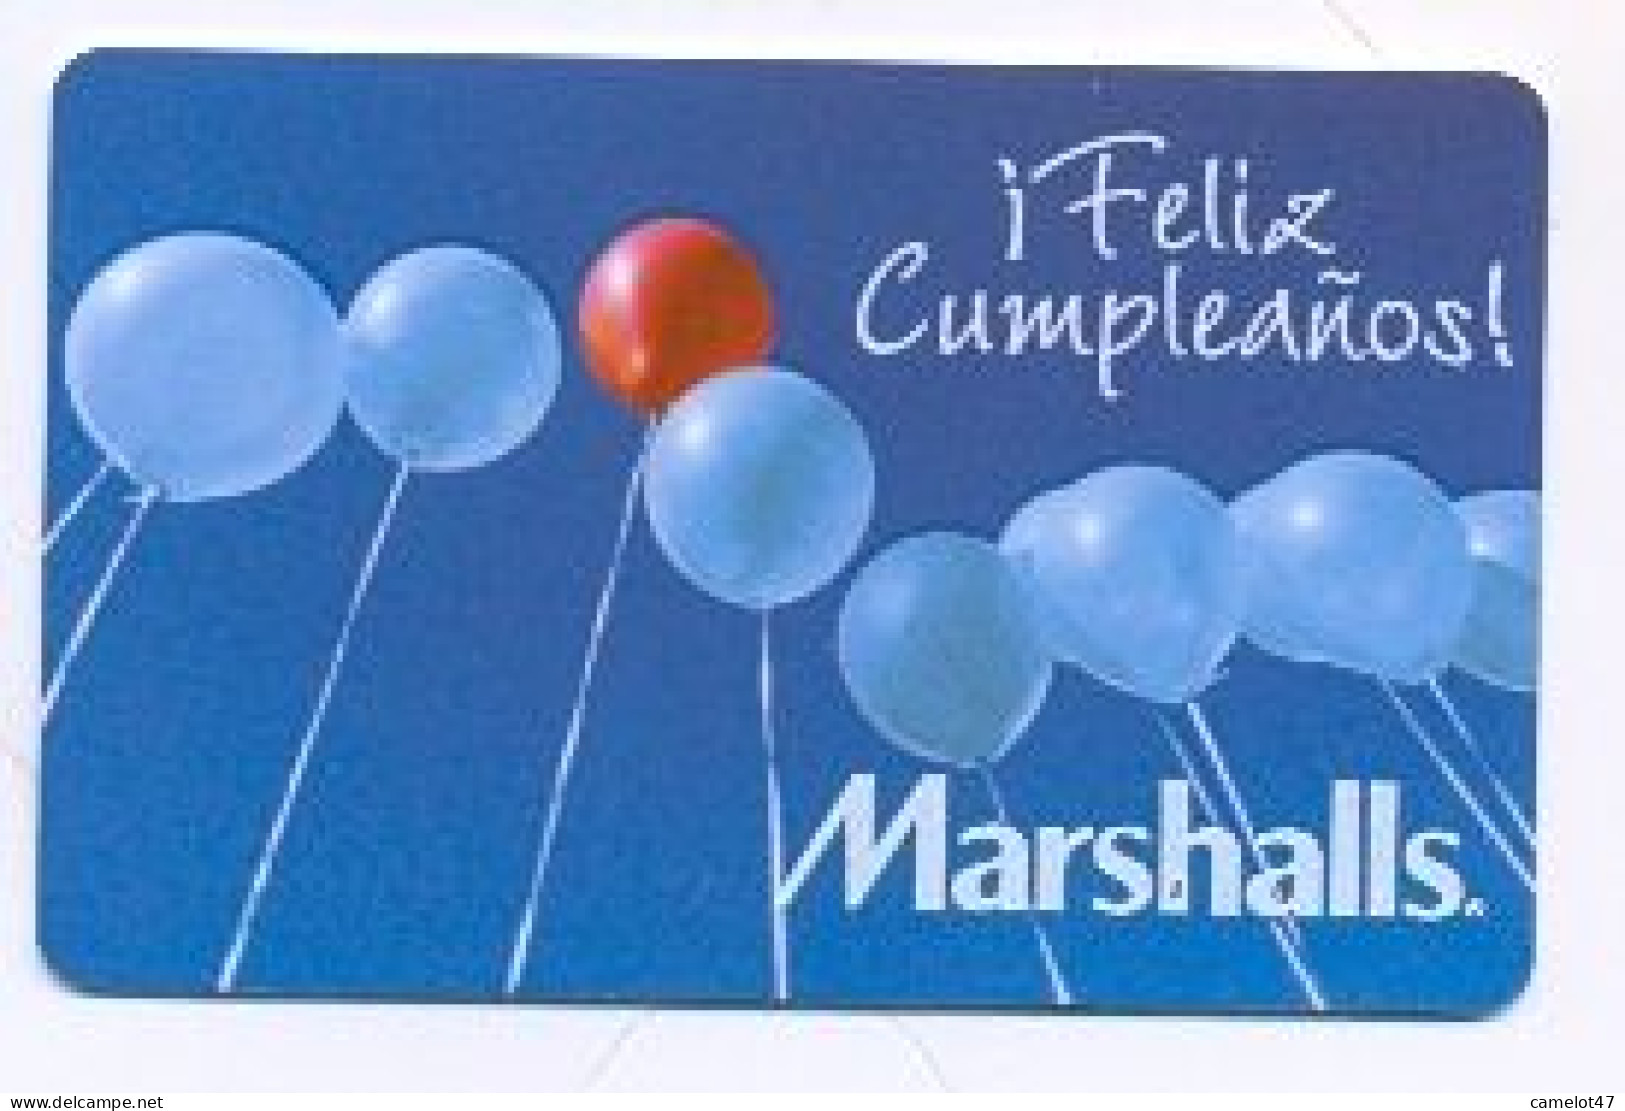 Marshalls, U.S.A., Carte Cadeau Pour Collection, Sans Valeur, # Marshalls-19b - Gift And Loyalty Cards